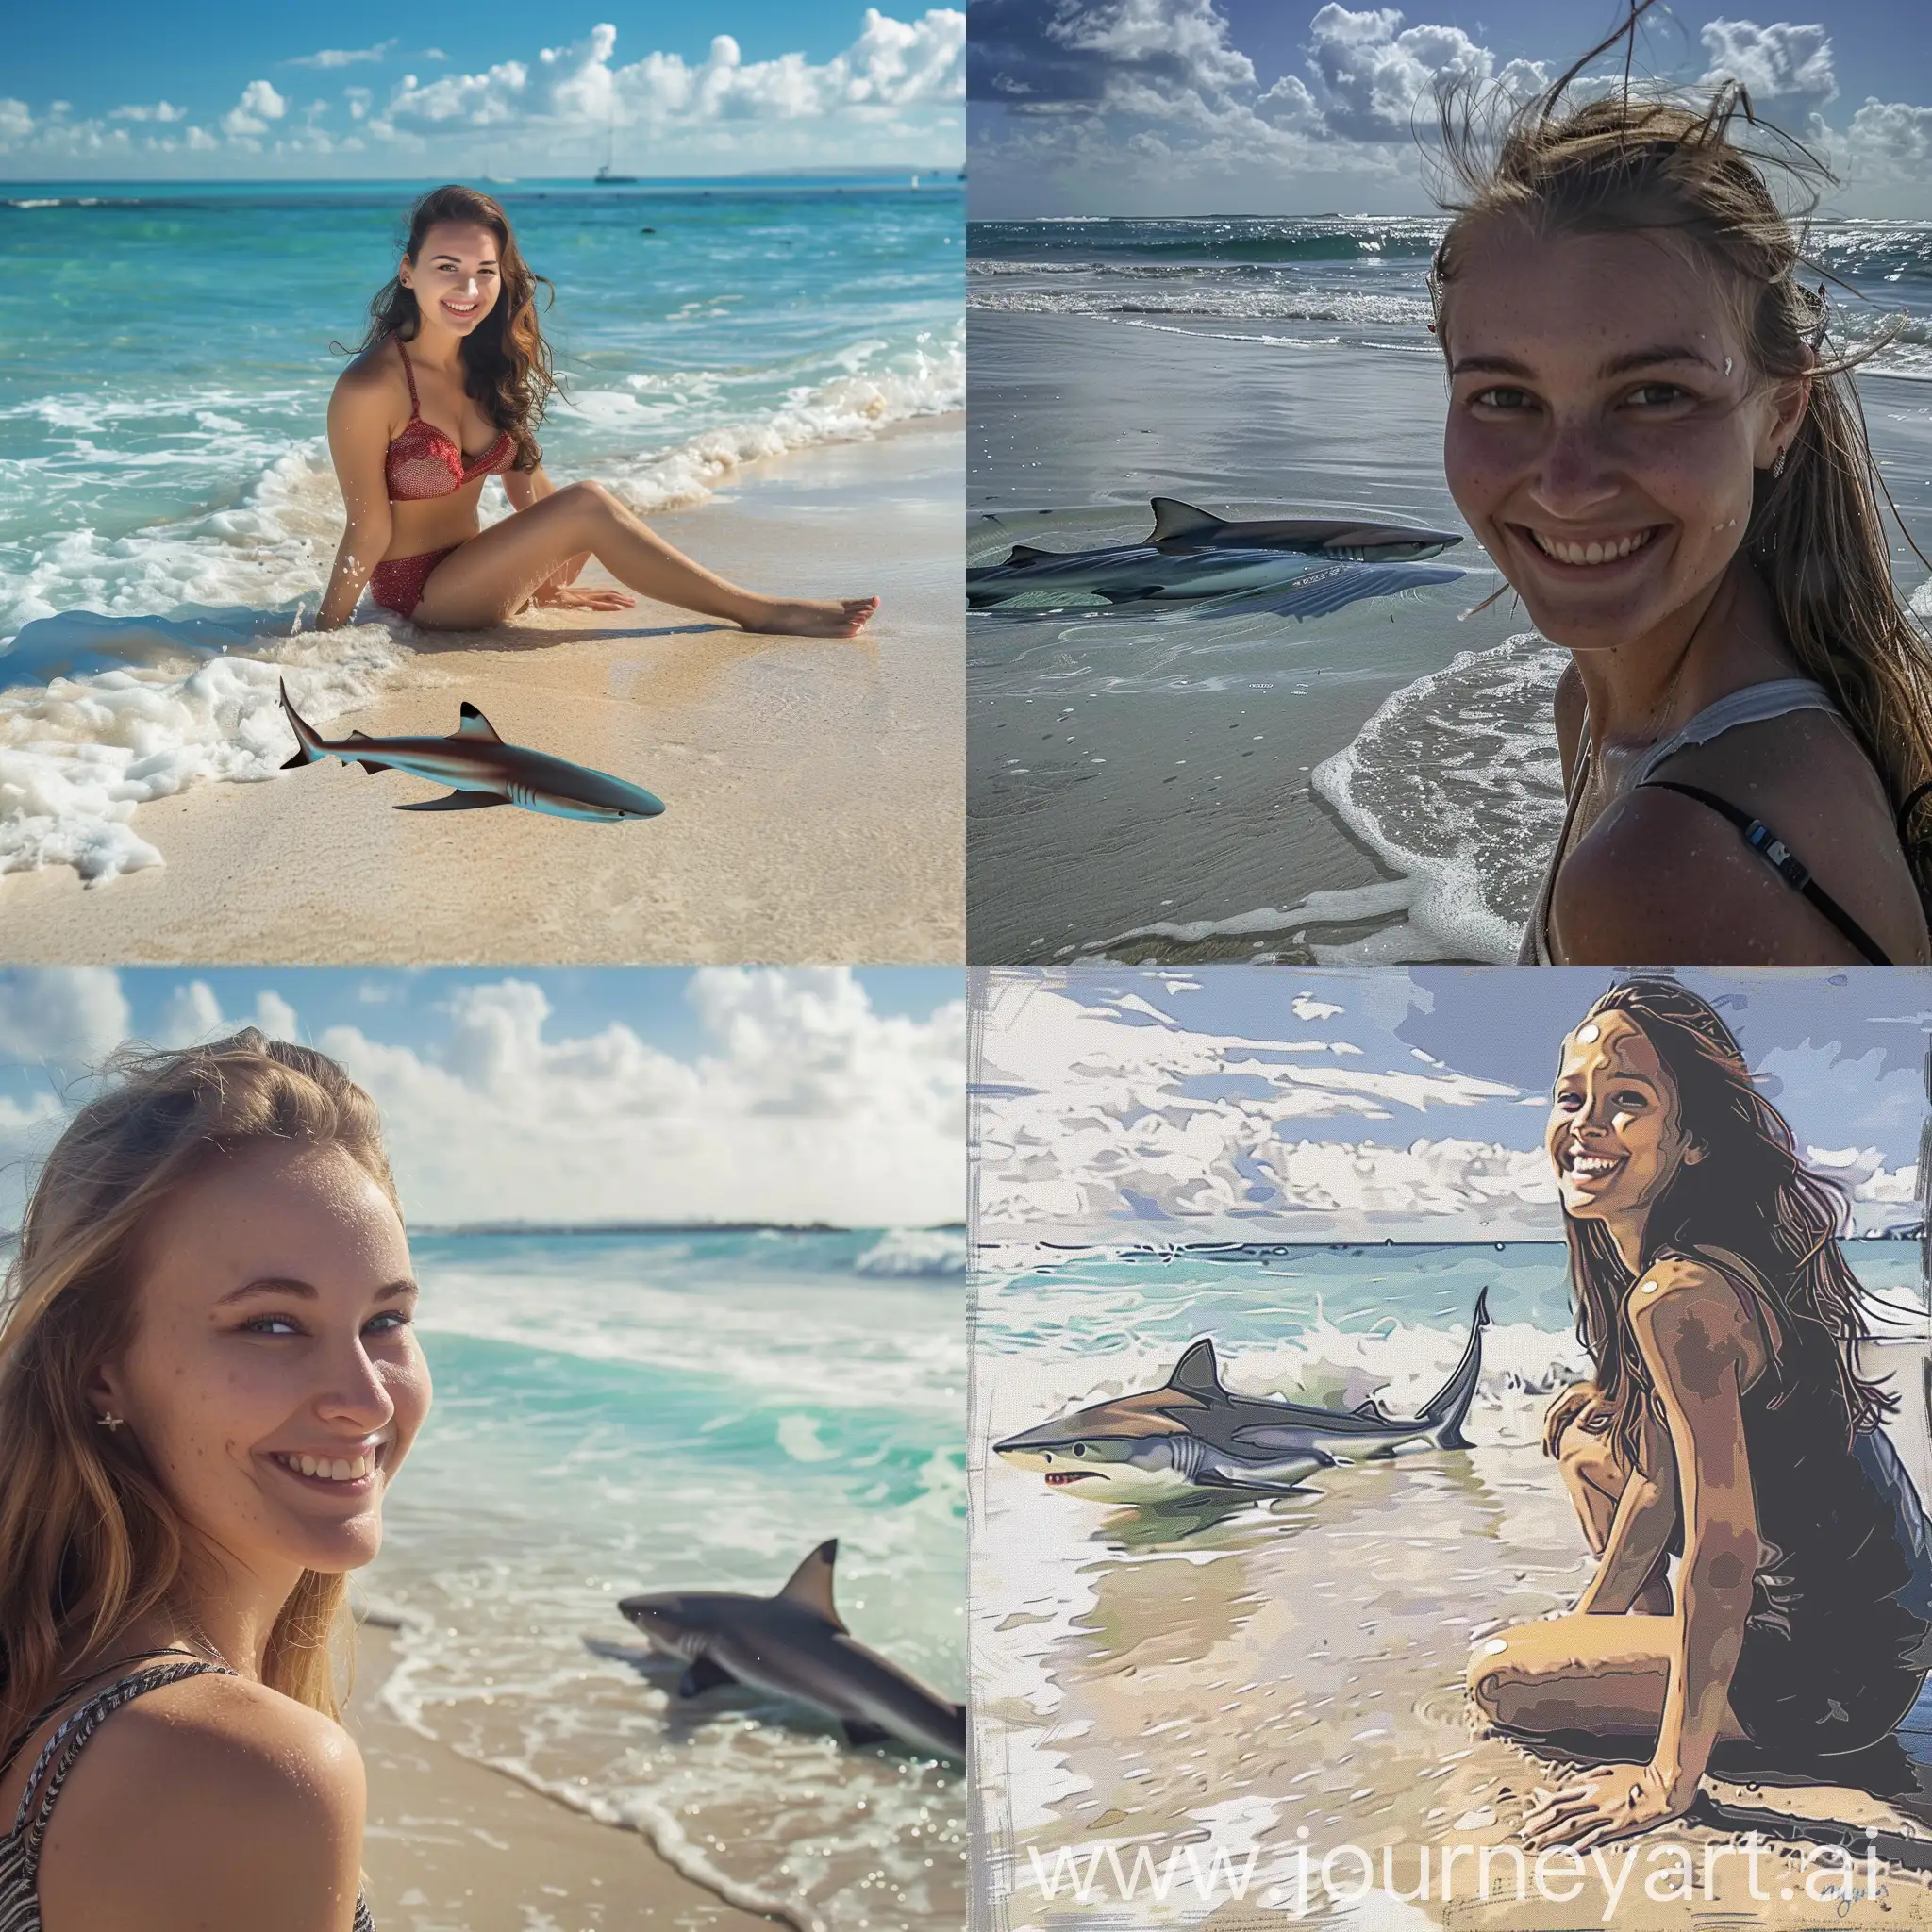 Girl at the beach, she is smiling, shark is in the ocean